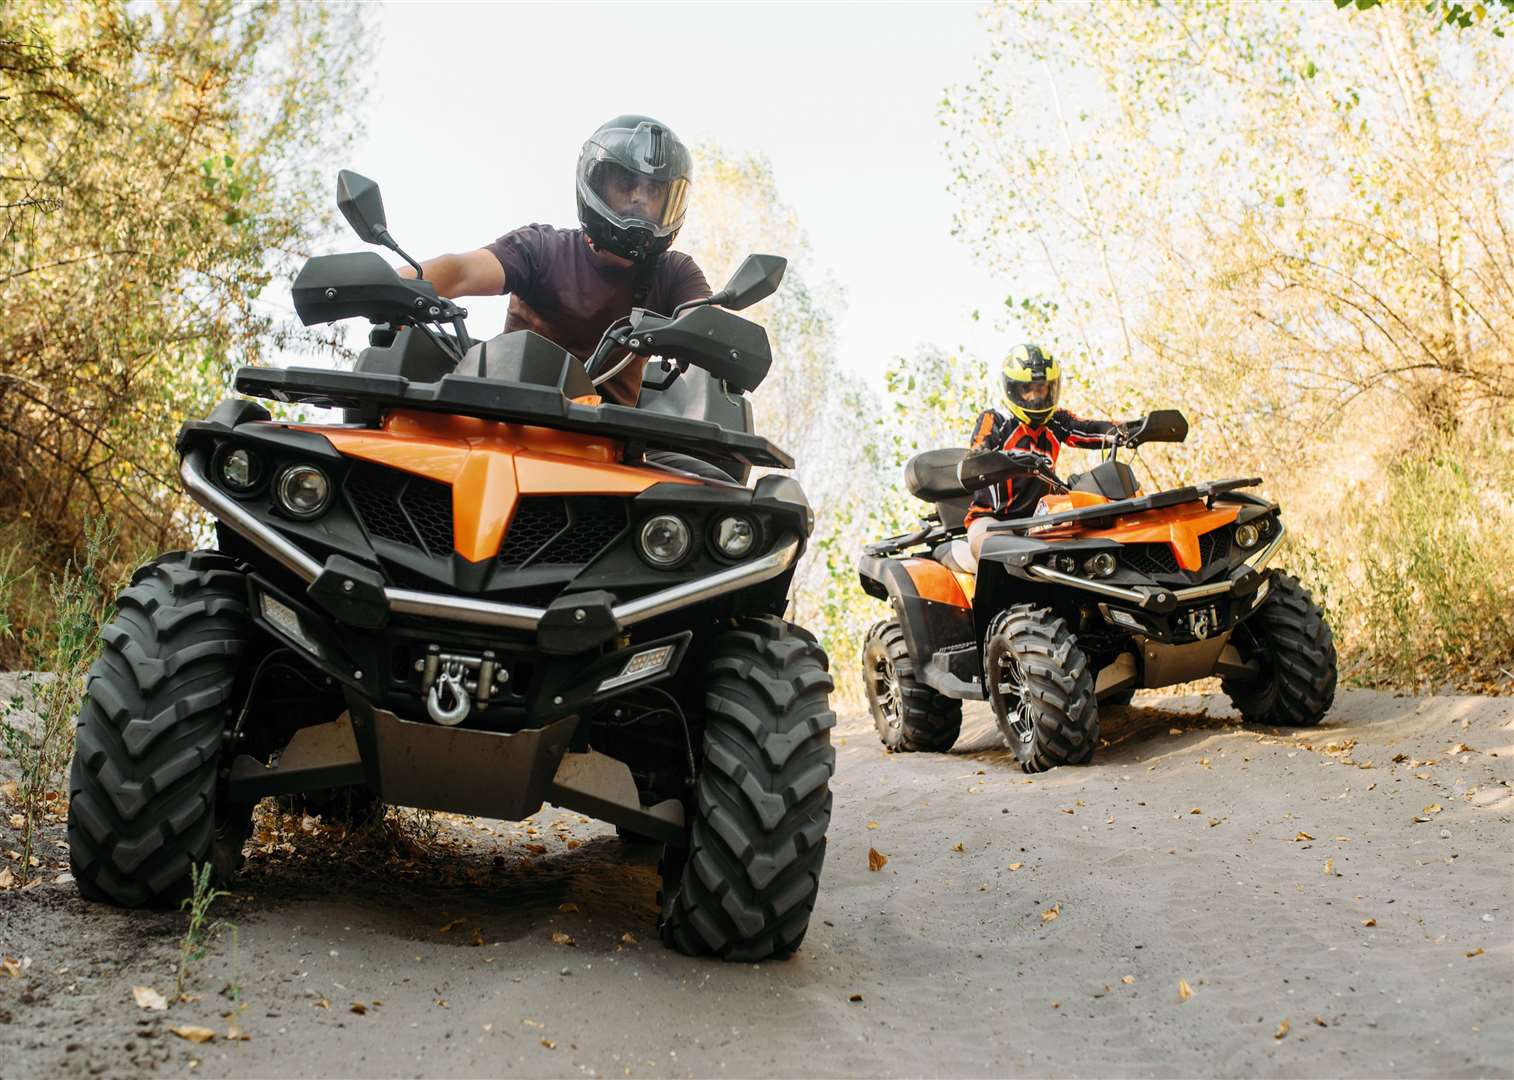 Quadbikes are popular machines for farmers – but carry a risk too